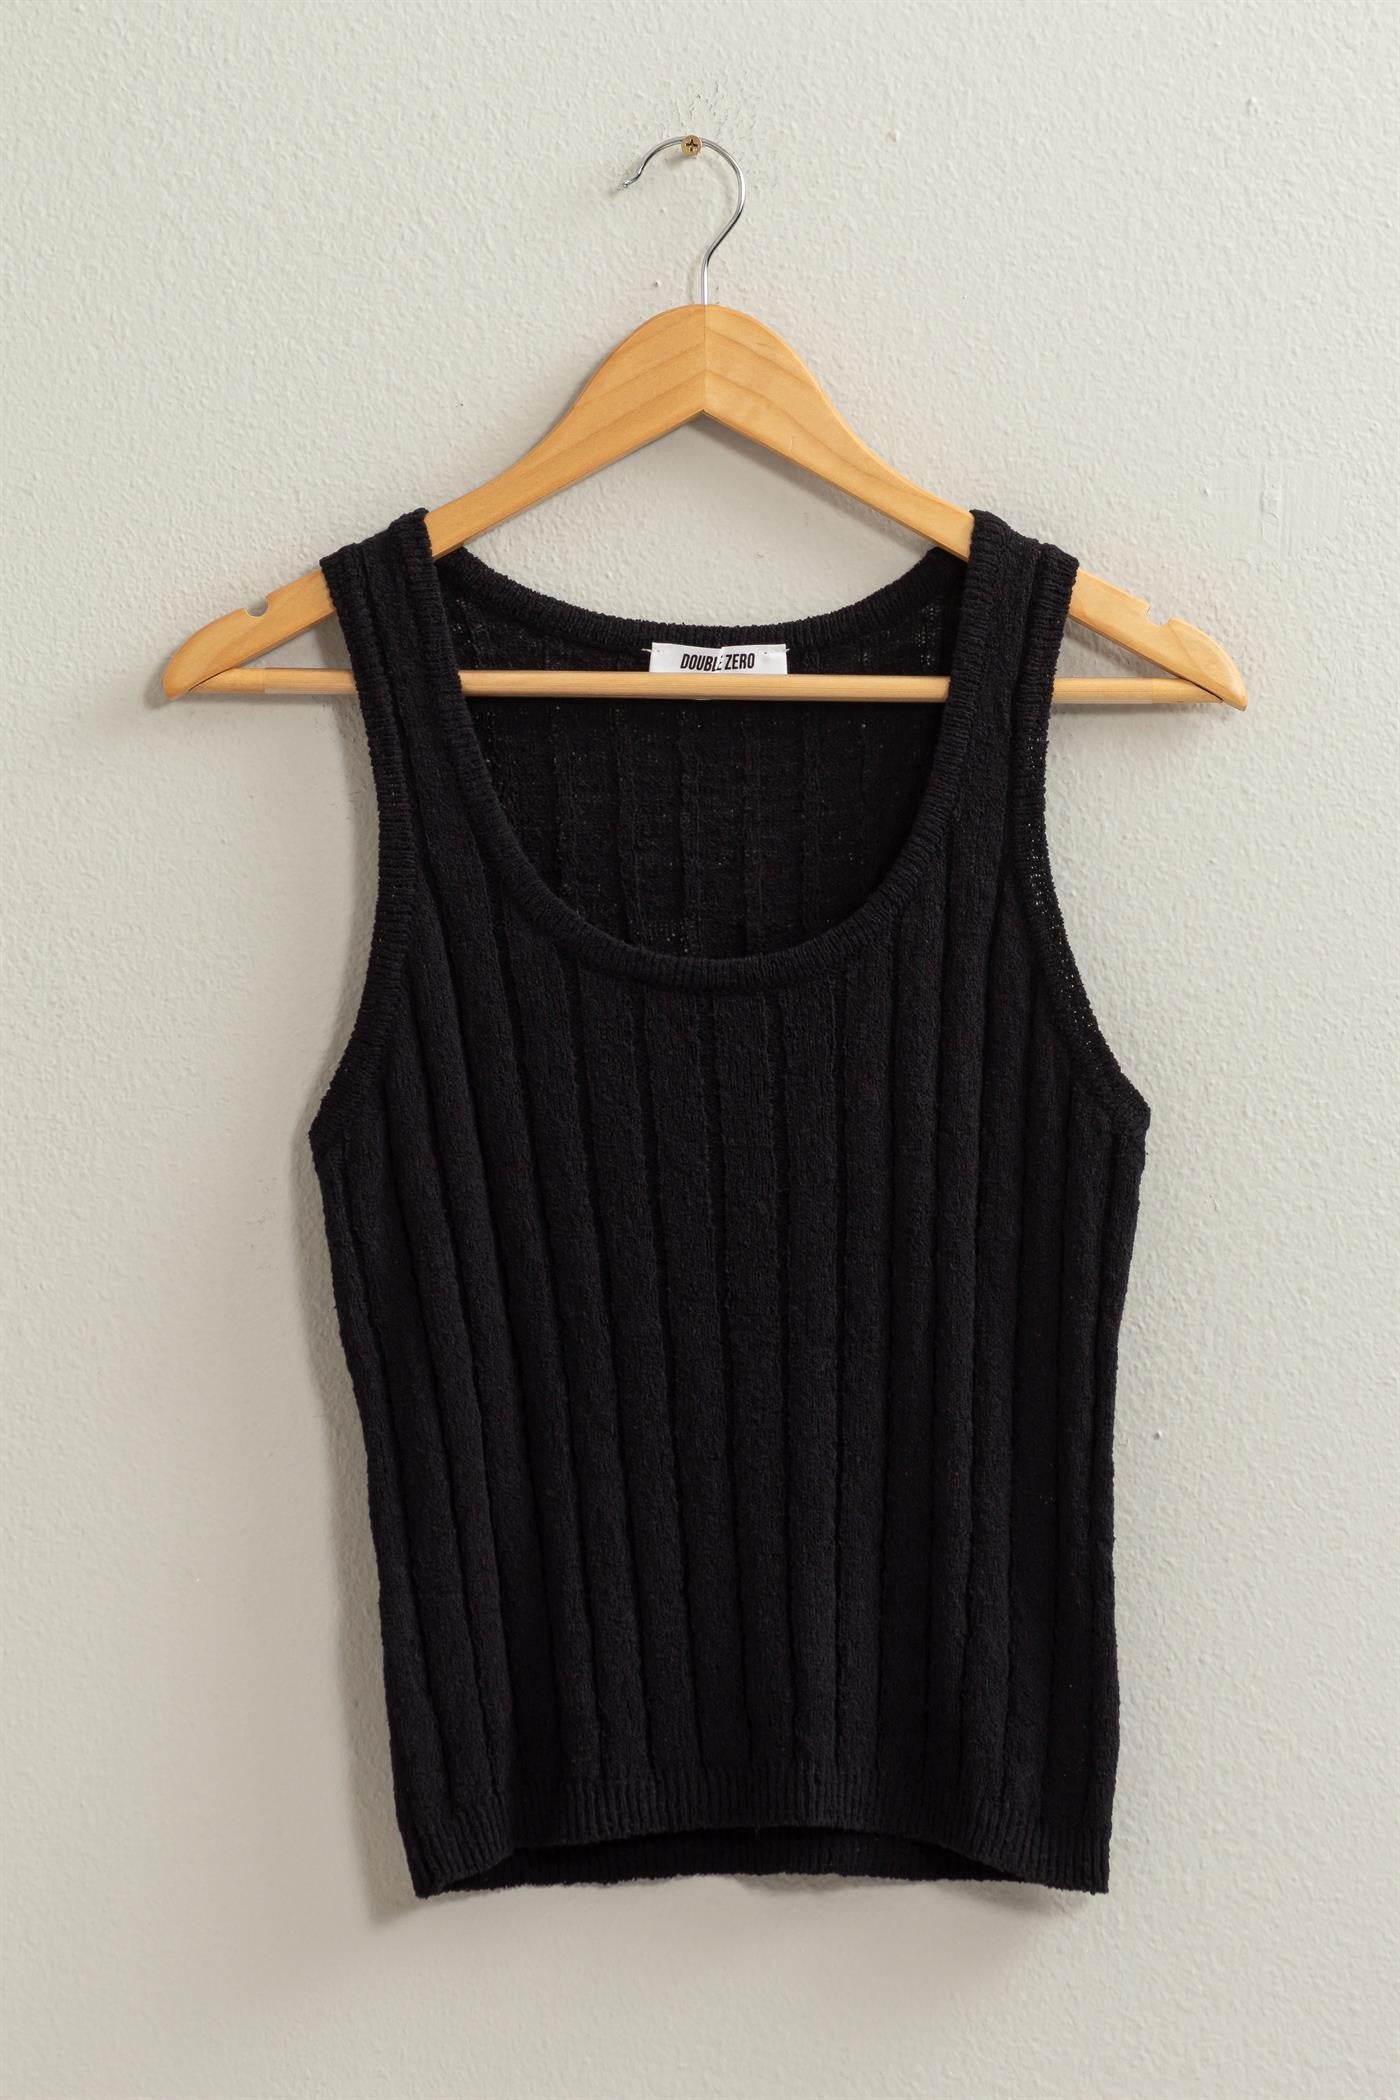 full length ribbed sweater tank, lightweight, semi see through sweater material, scoop neck